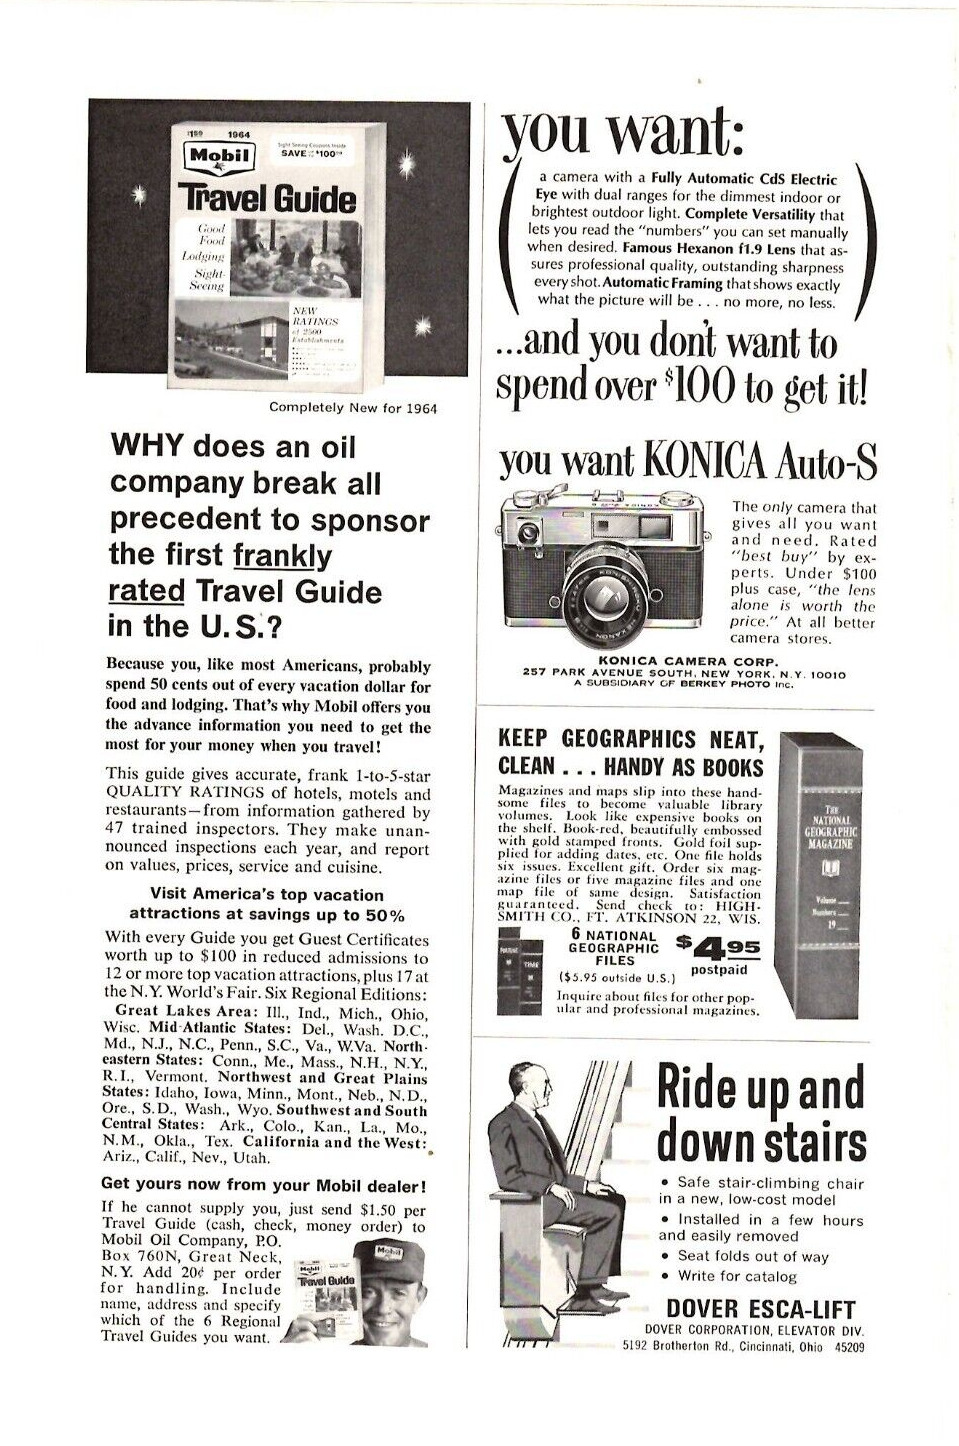 1964 Print Ad Konica Auto-S Camera Fully Automatic Cds Electric Eye Dual Ranges